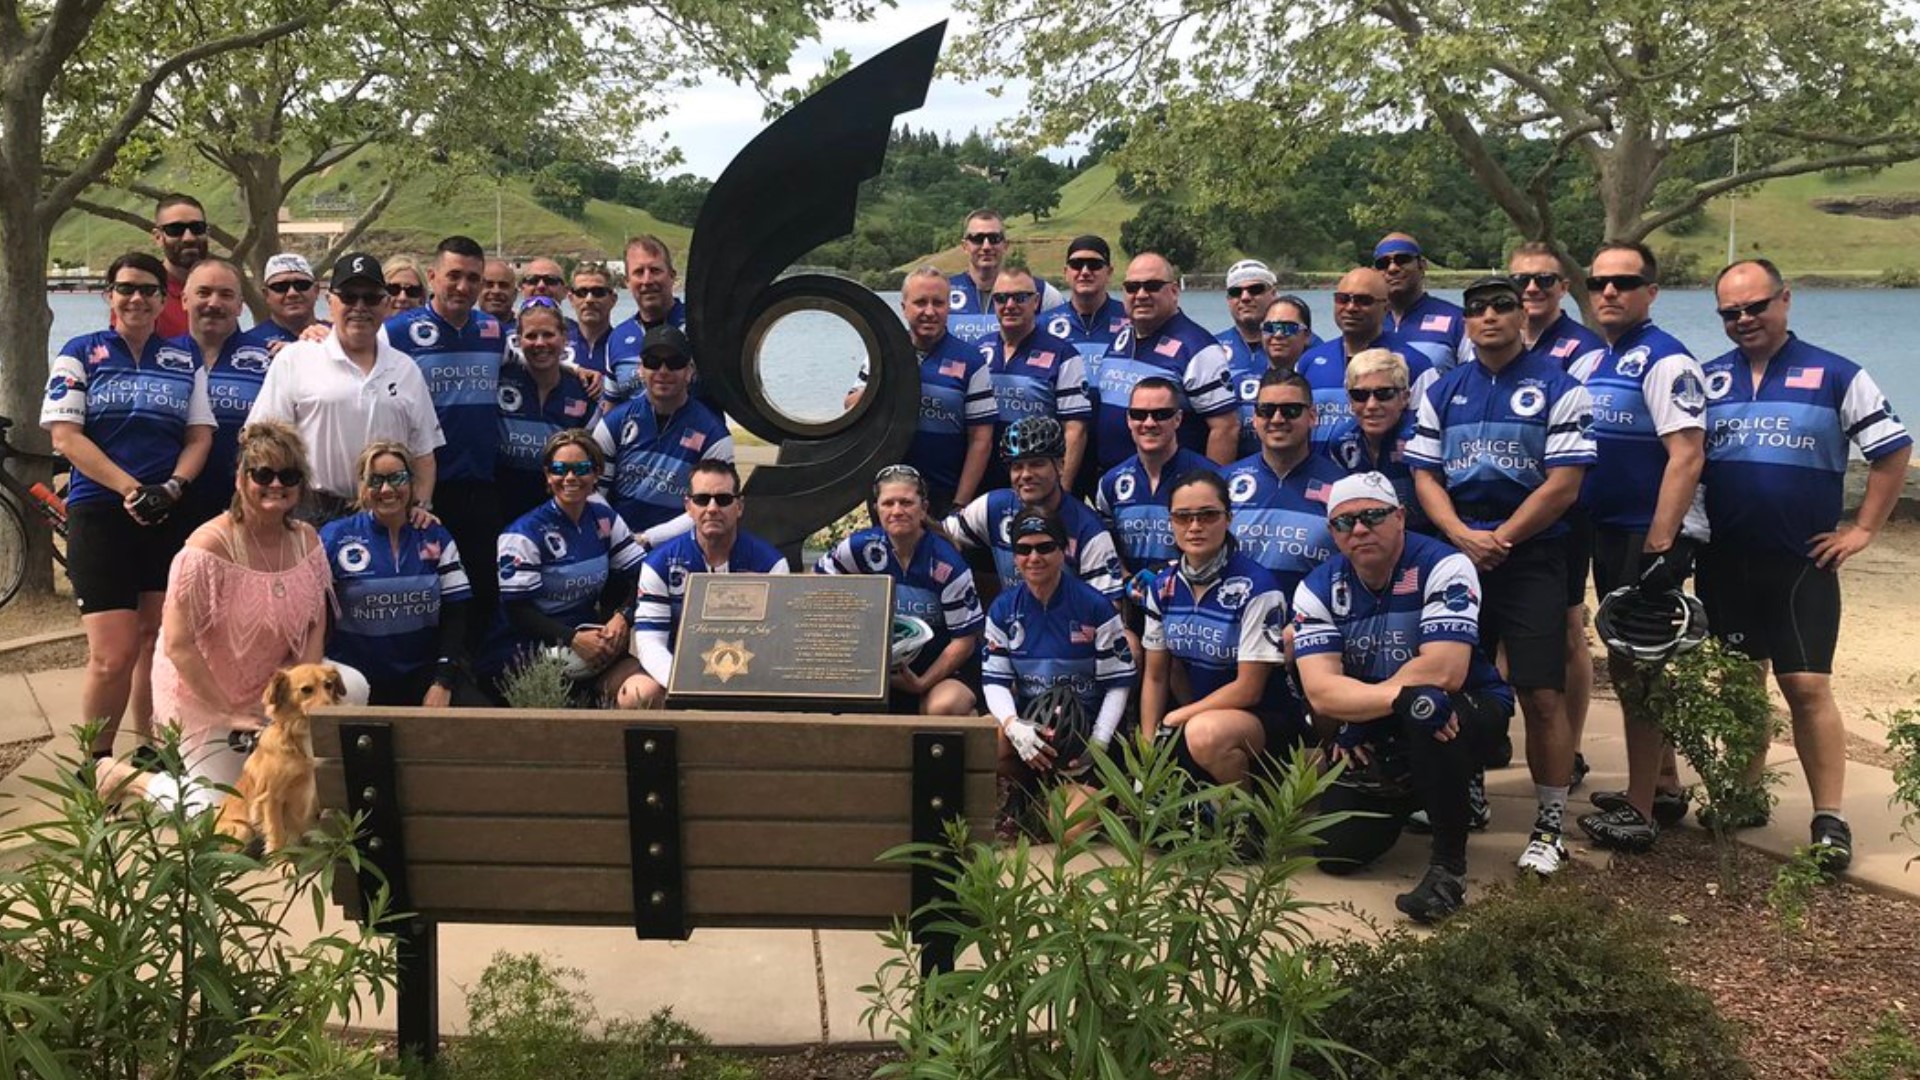 Dozens of officers were preparing for the more than 300 mile bike ride known as the Police Unity Tour. The effort is a way to honor the memories of fallen law enforcement and their families across the nation.